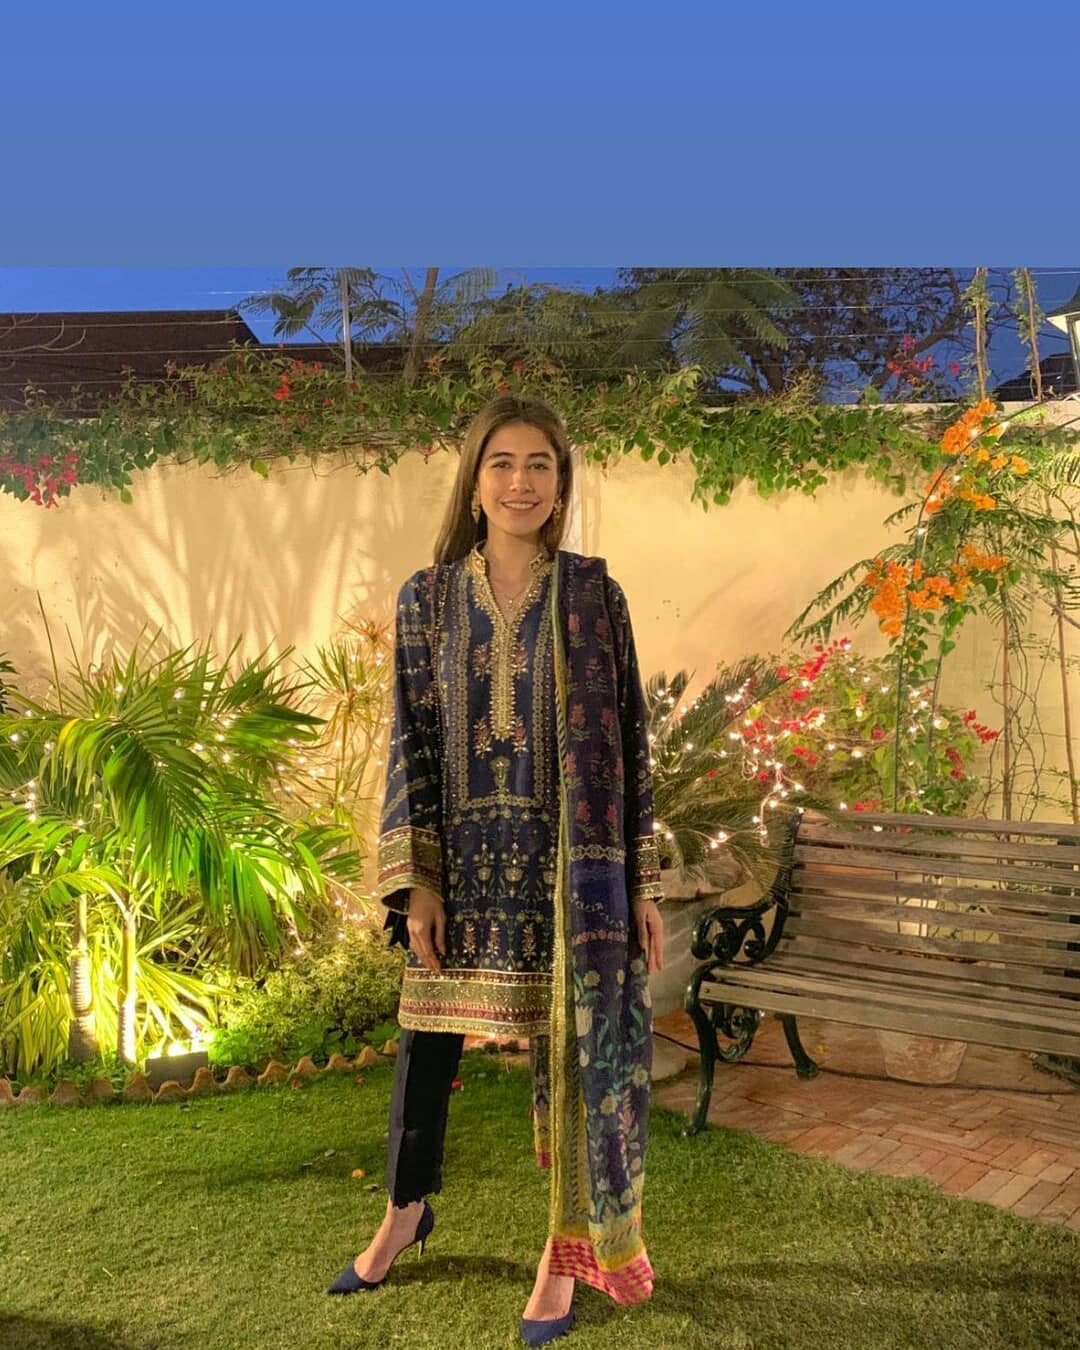 Latest Pictures of Syra Yousaf from her Friend's Wedding